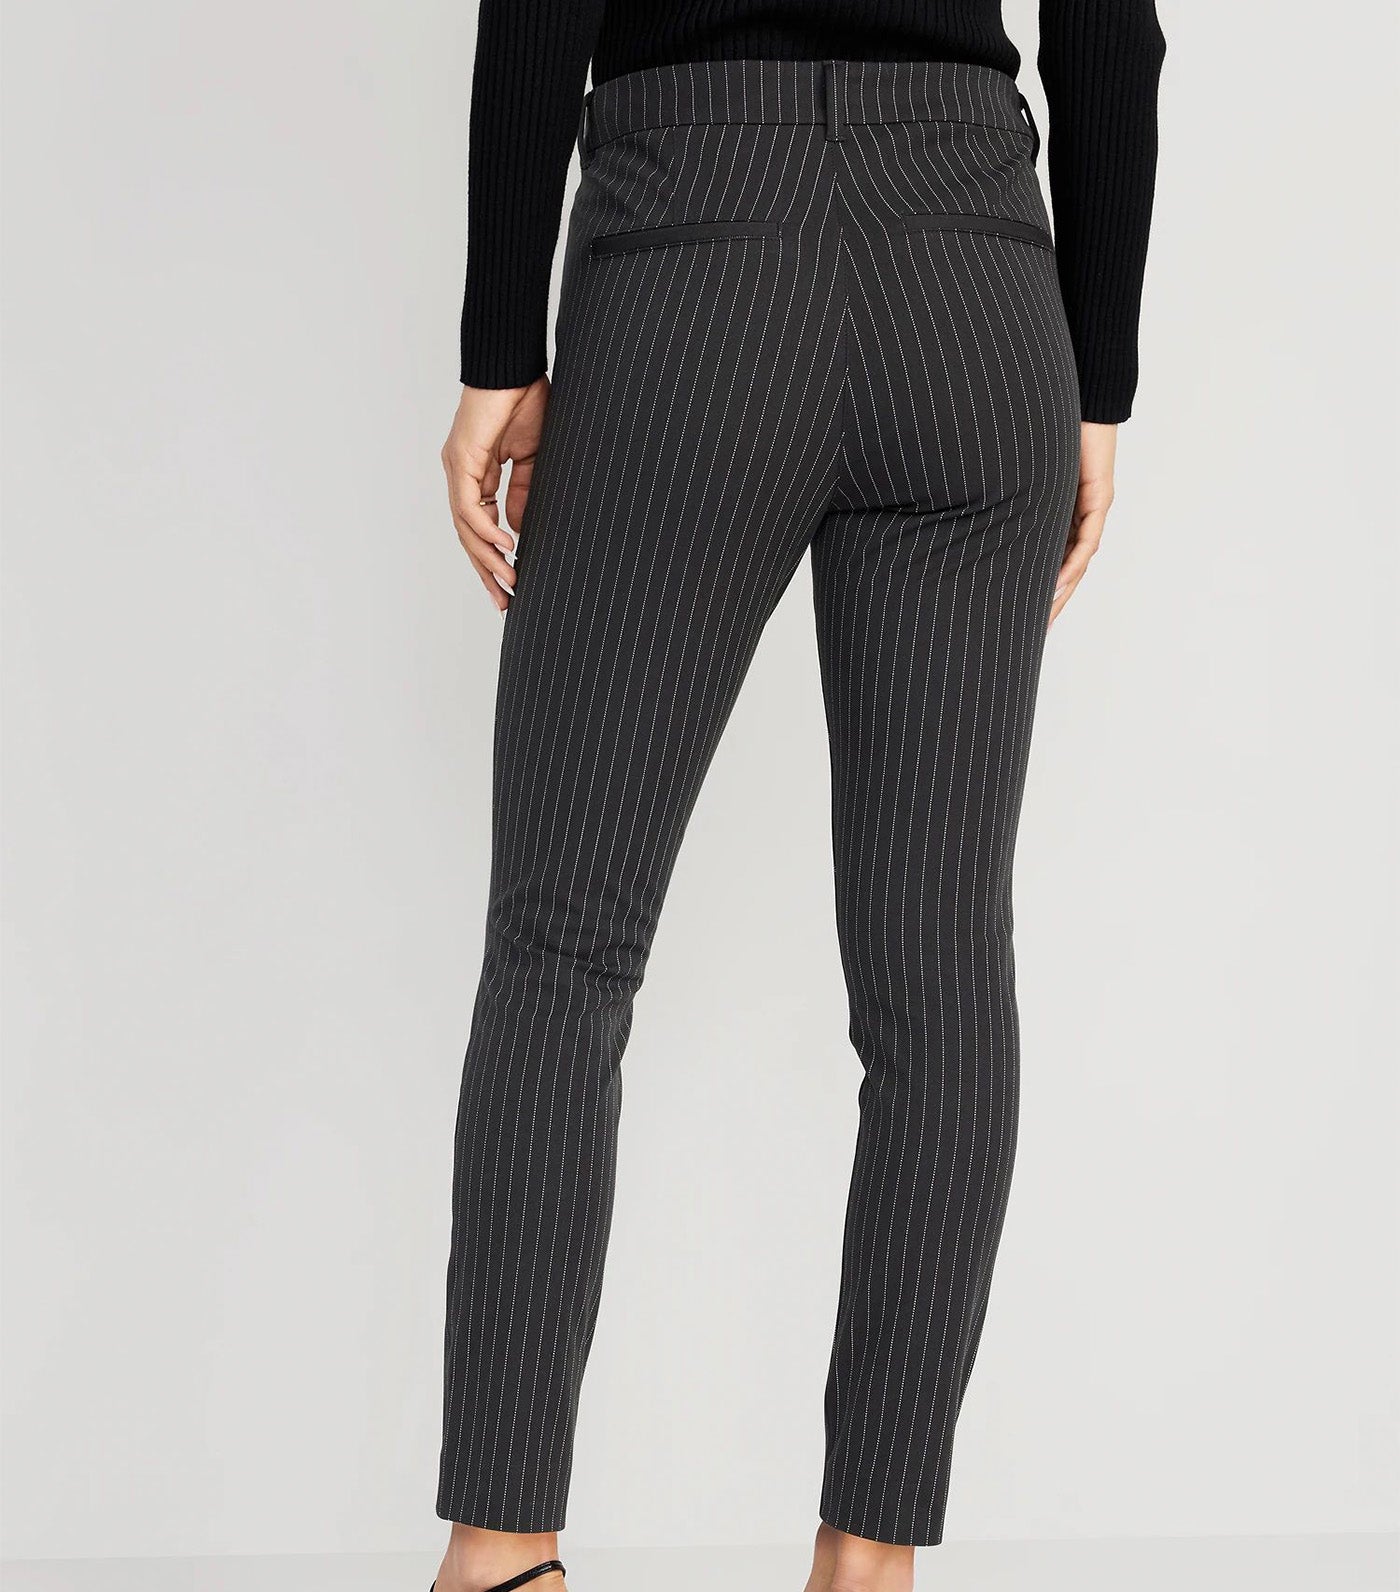 High-Waisted Pixie Skinny Ankle Pants for Women Gray Pinstripe